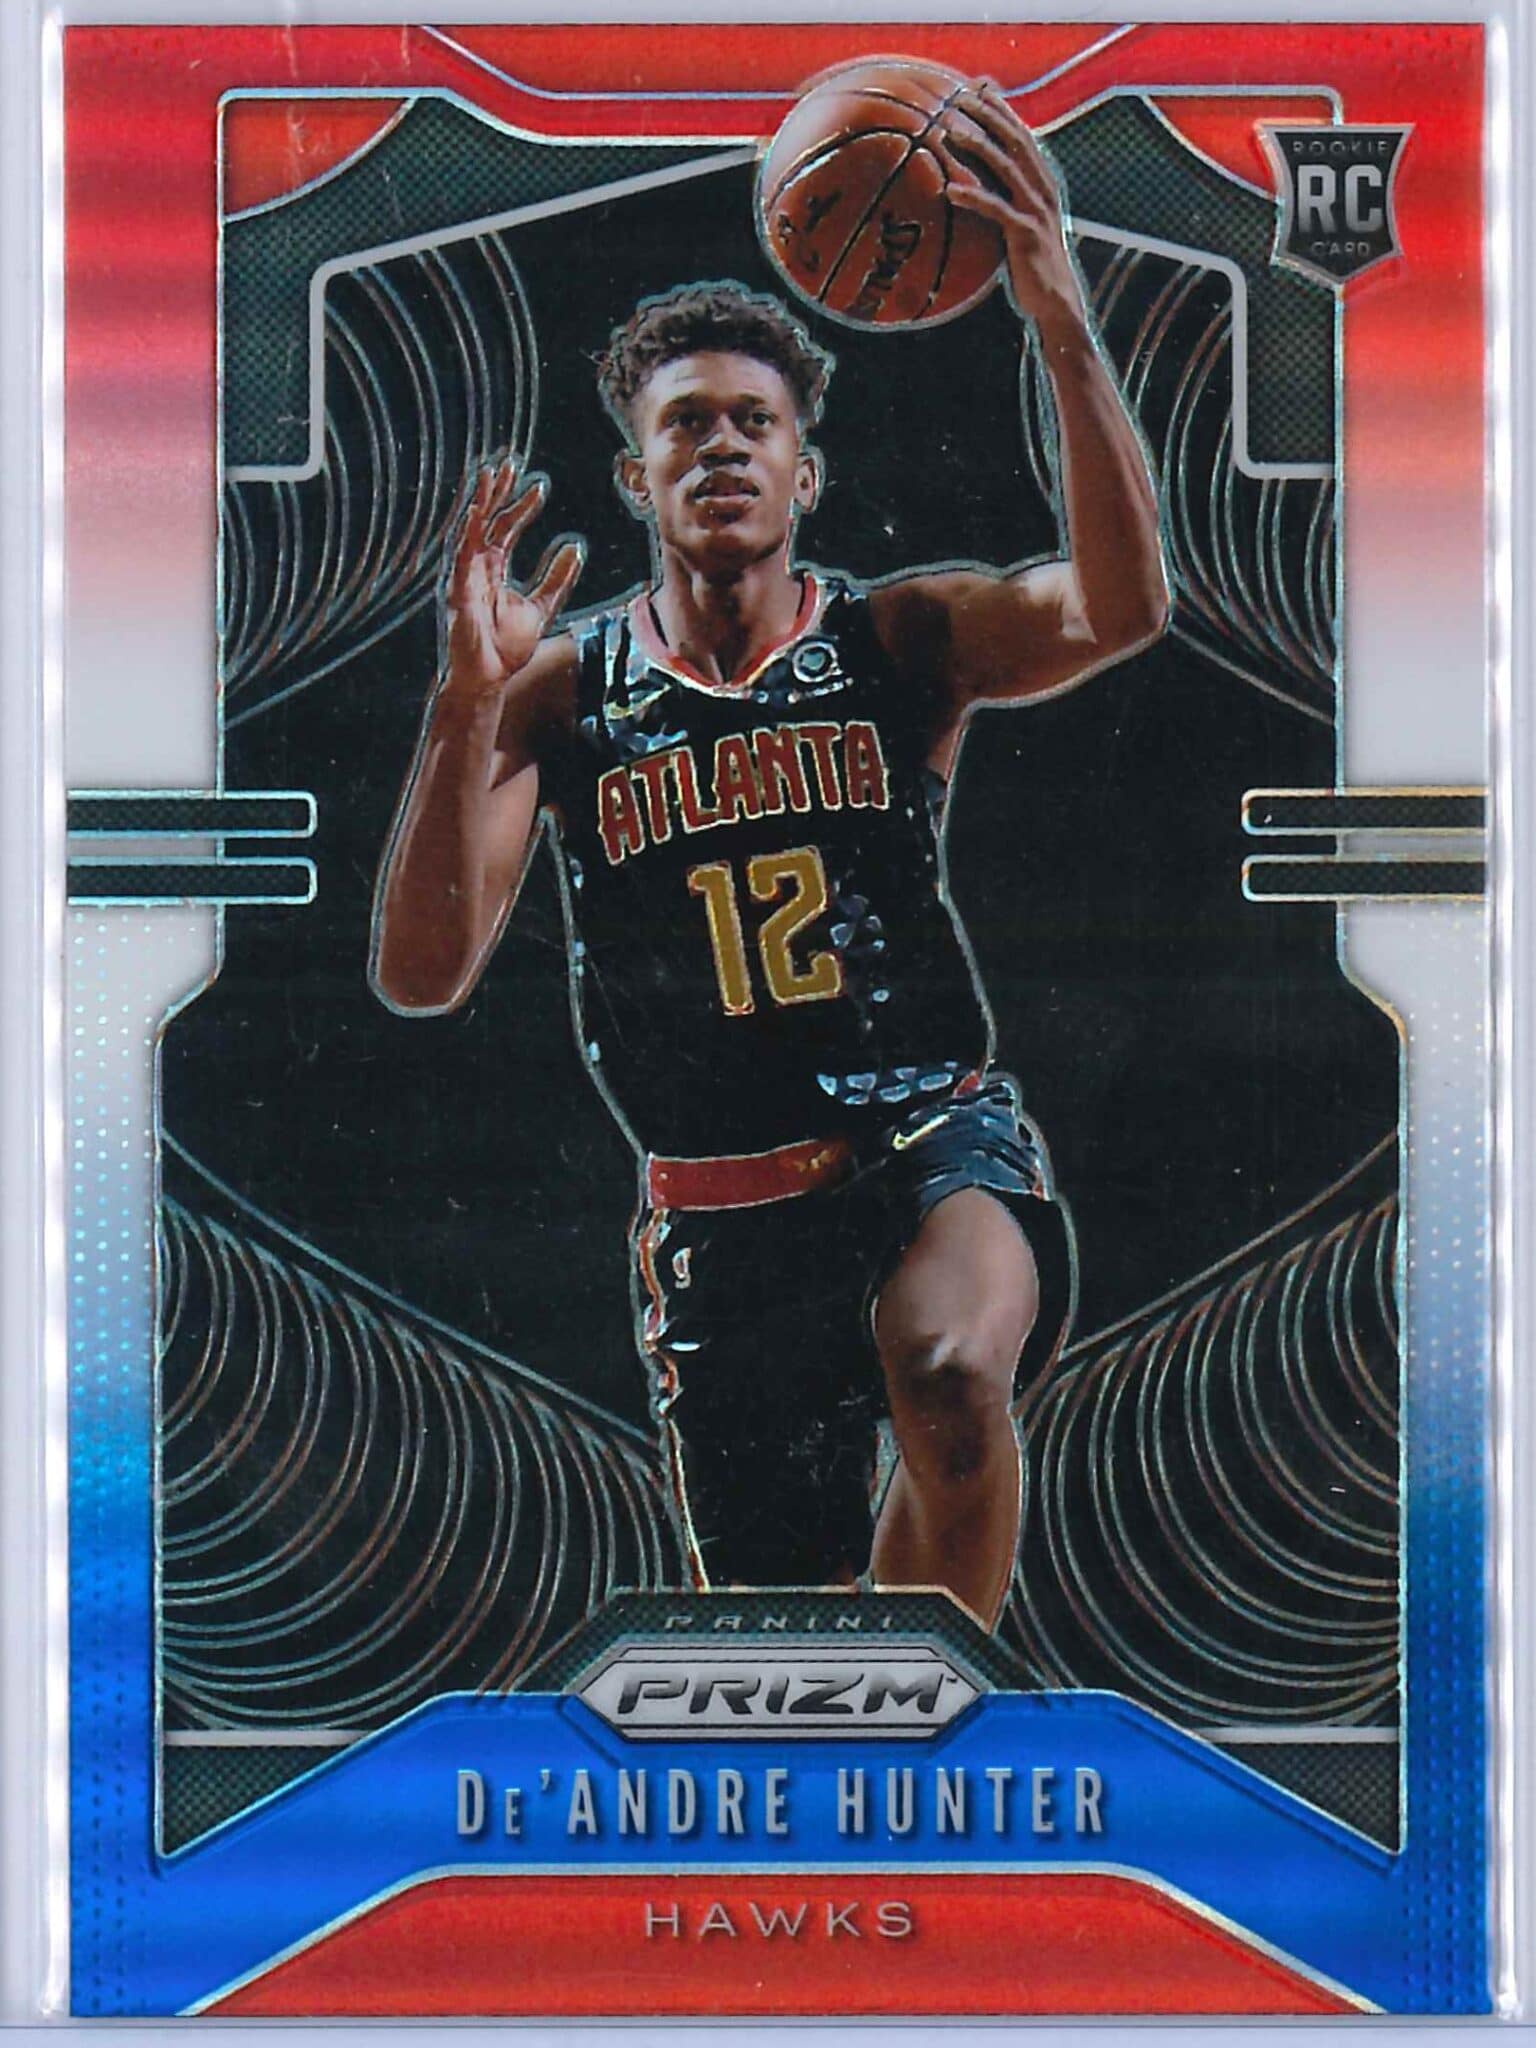 De Andre Hunter Panini Prizm 2019 20 Base RC Red White Blue 1 scaled